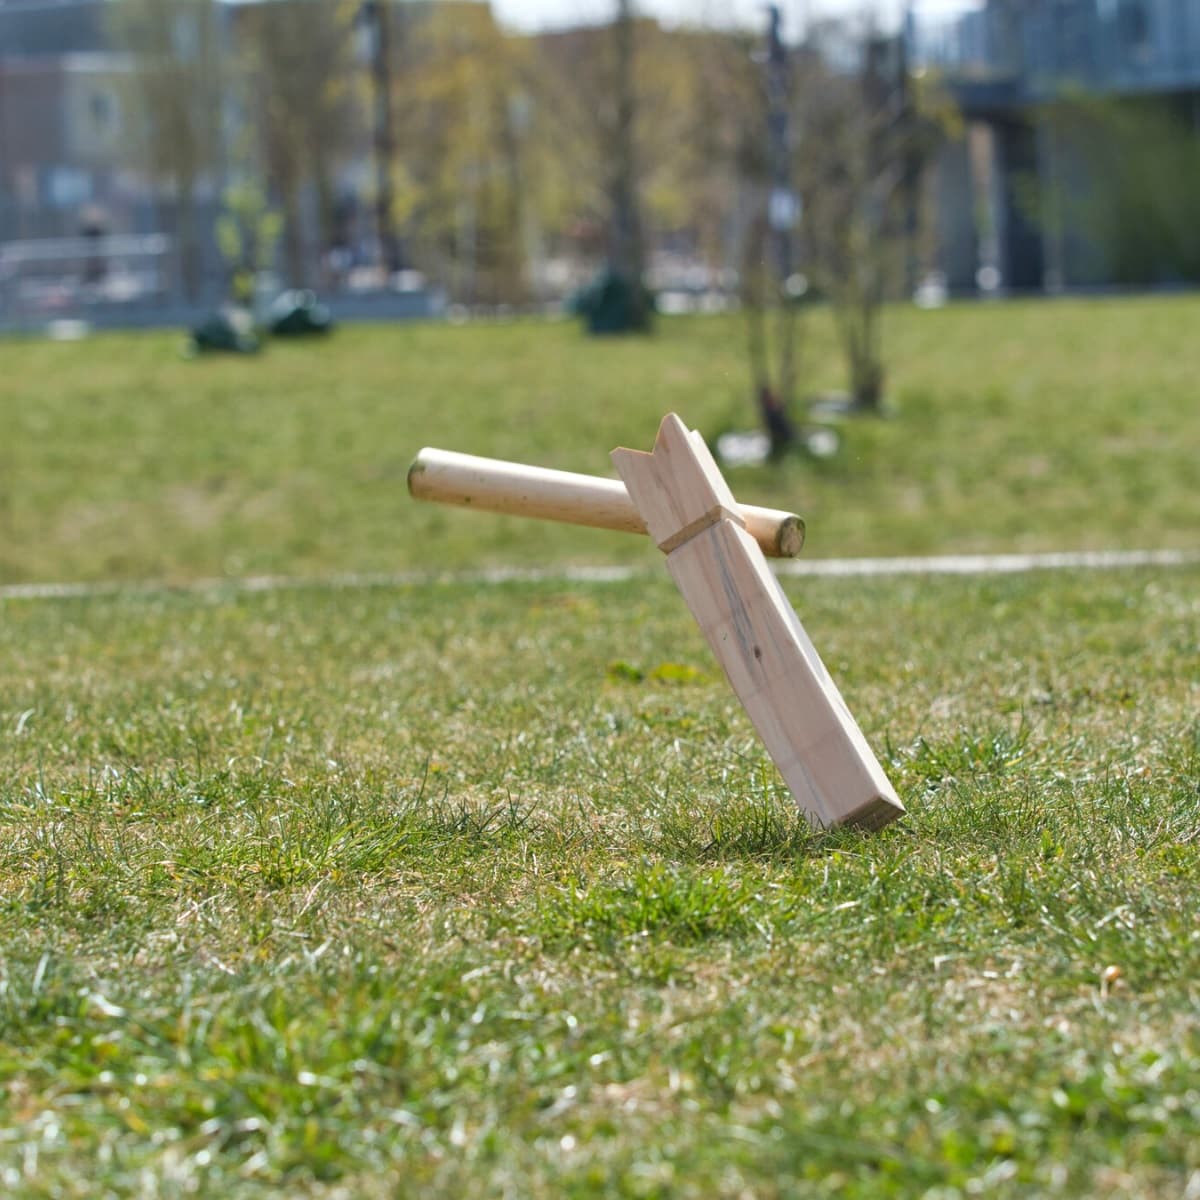 Throwing the king Kubb